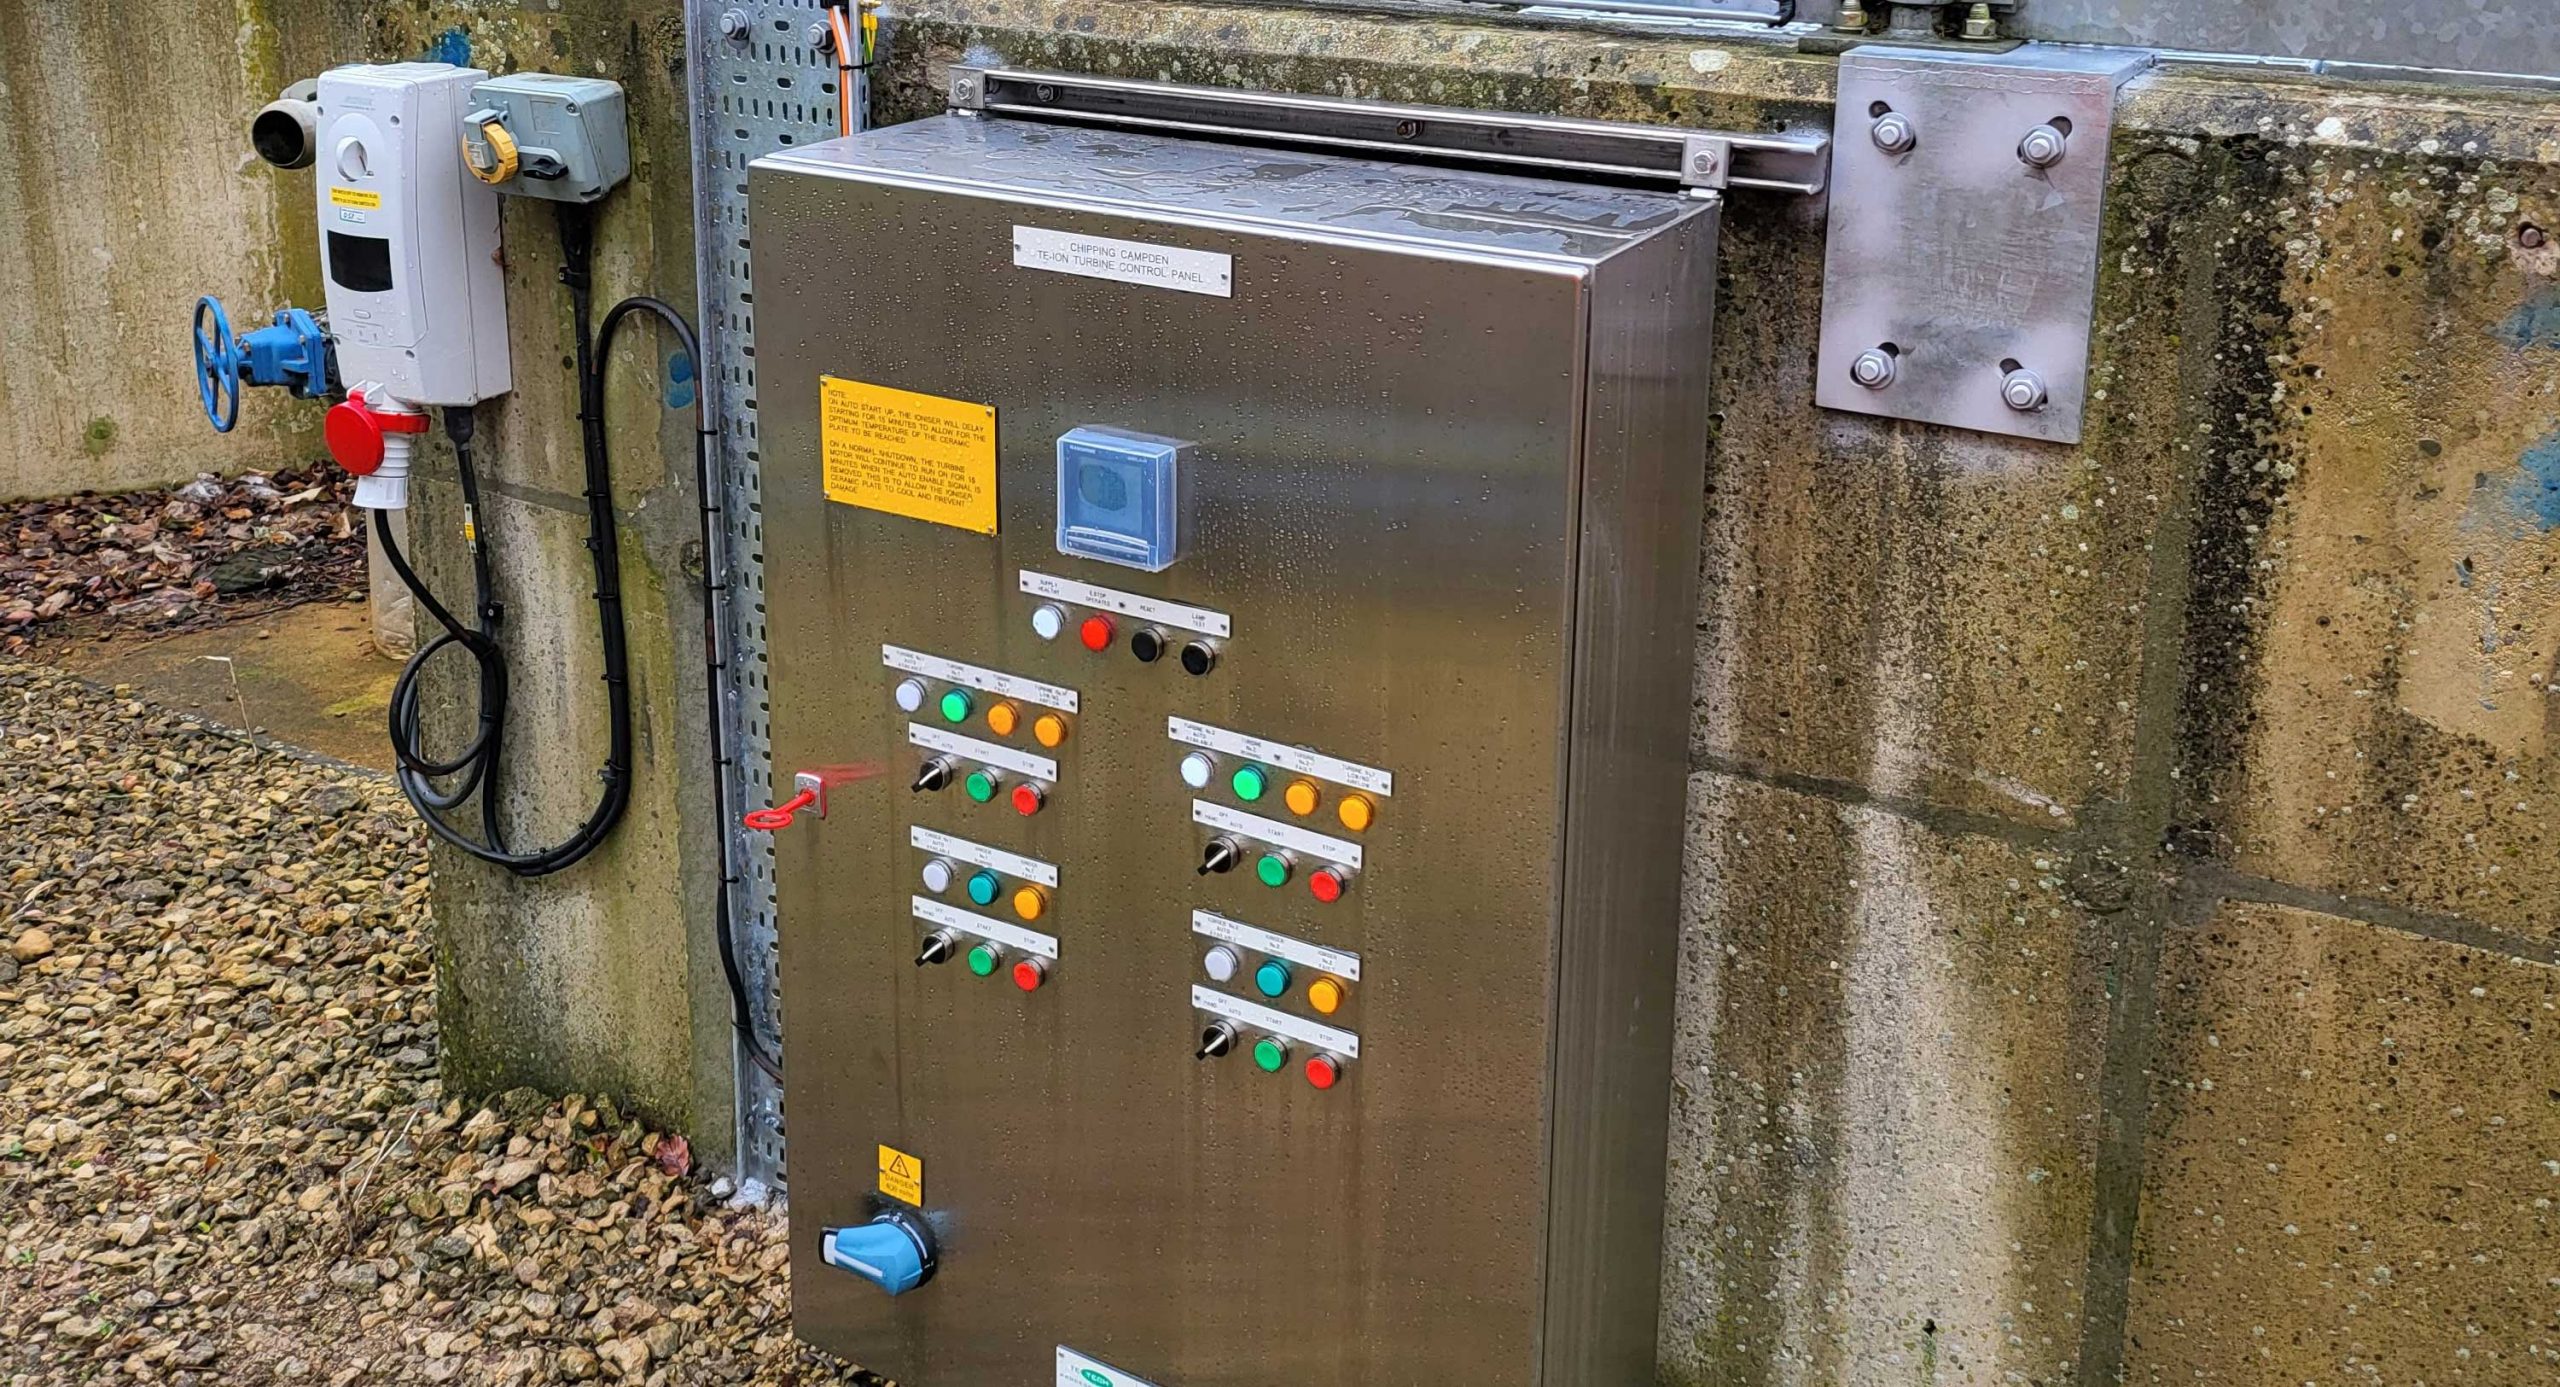 Te-Tech install te-ion advanced oxidation technology at Severn Trent’s Chipping Campden works